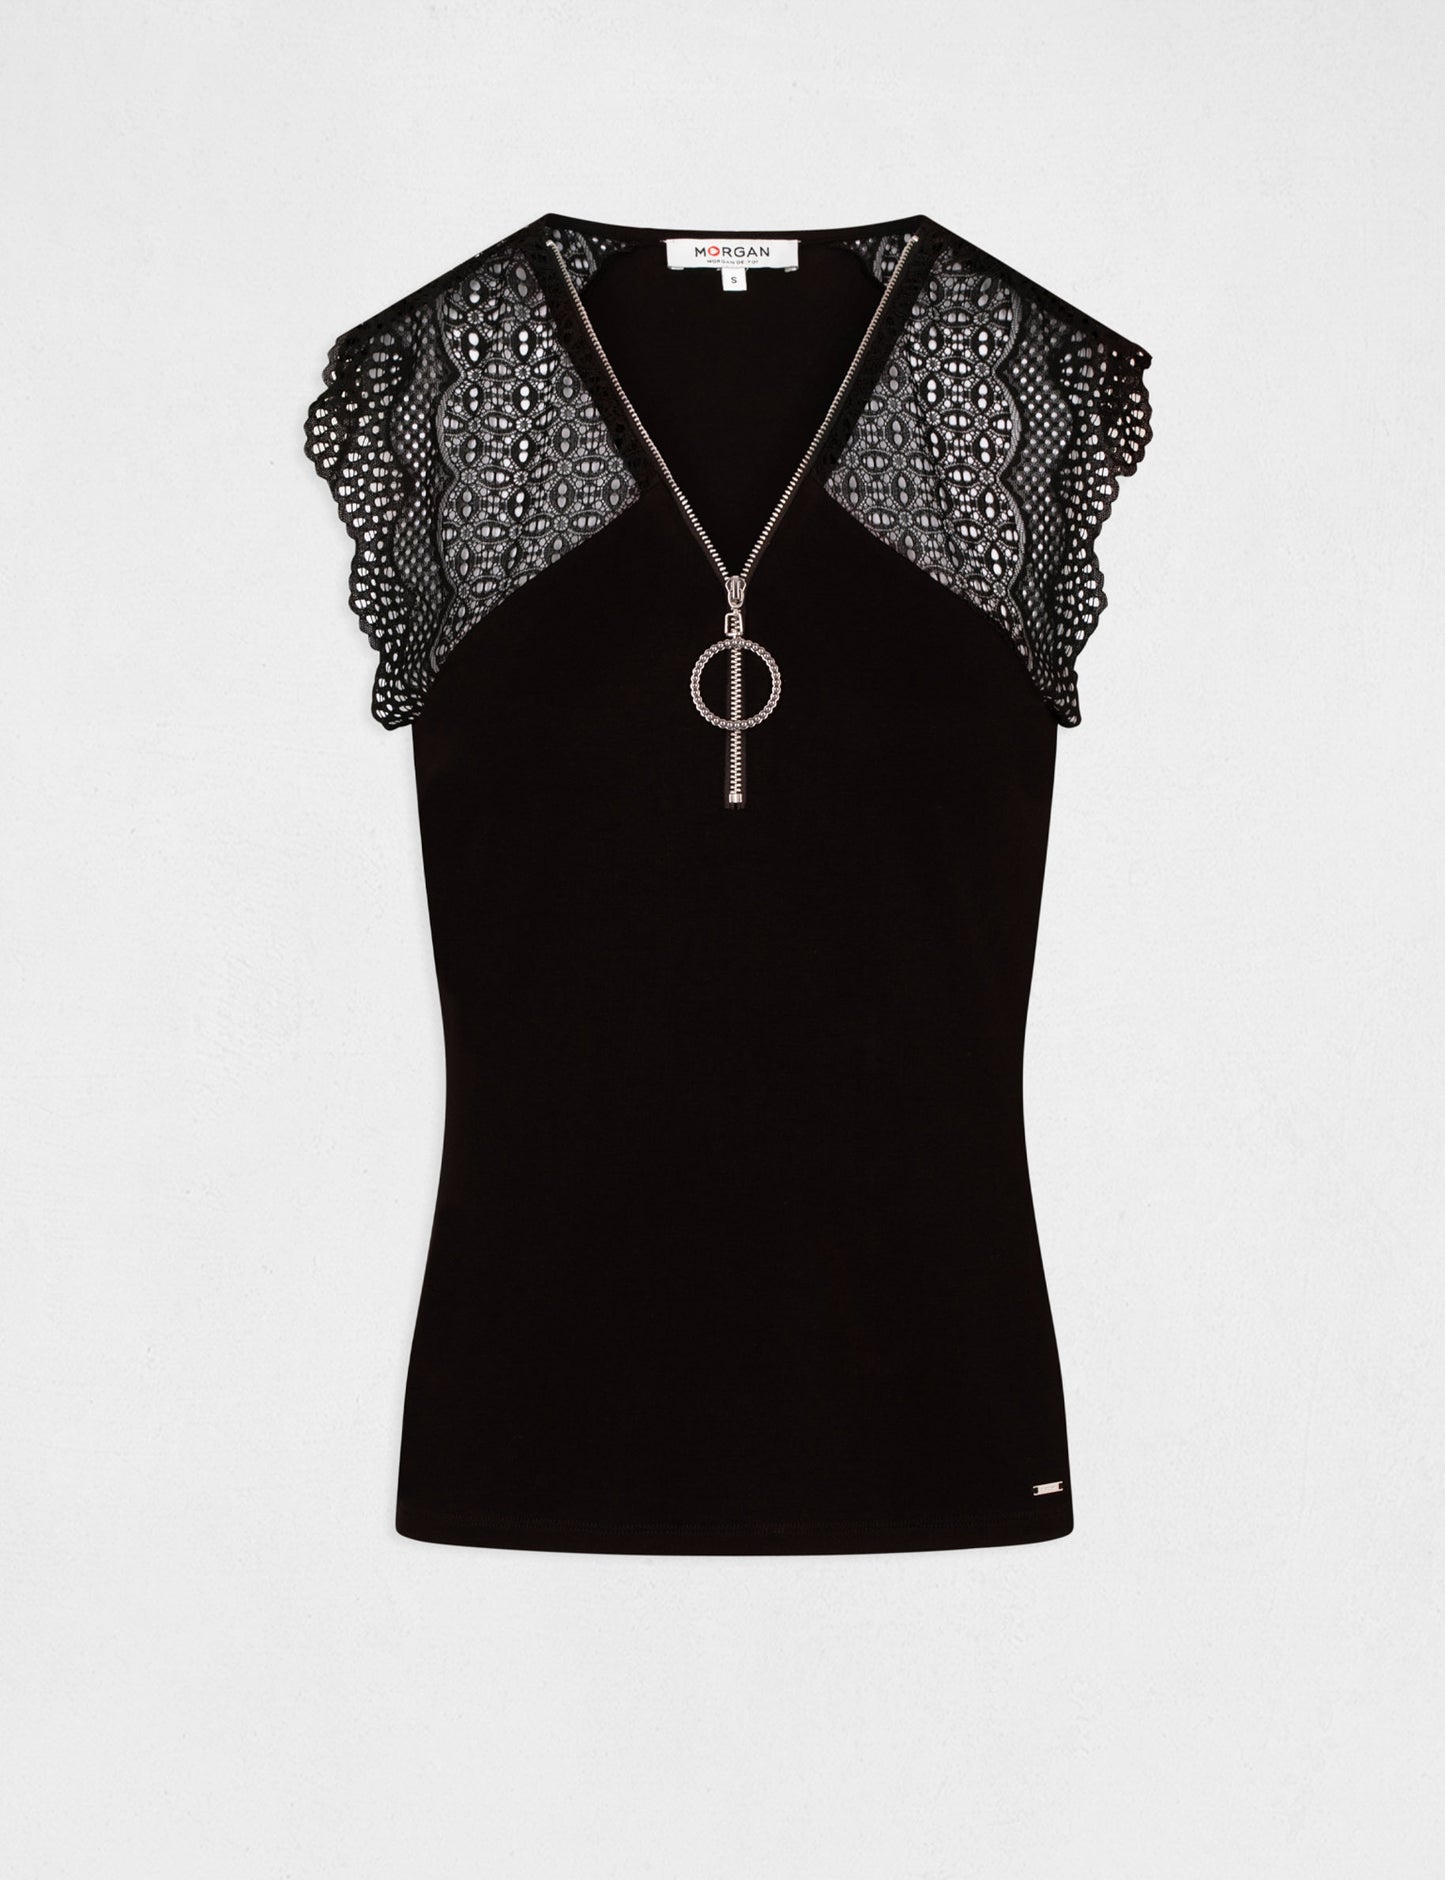 Lace T-shirt with short sleeves black